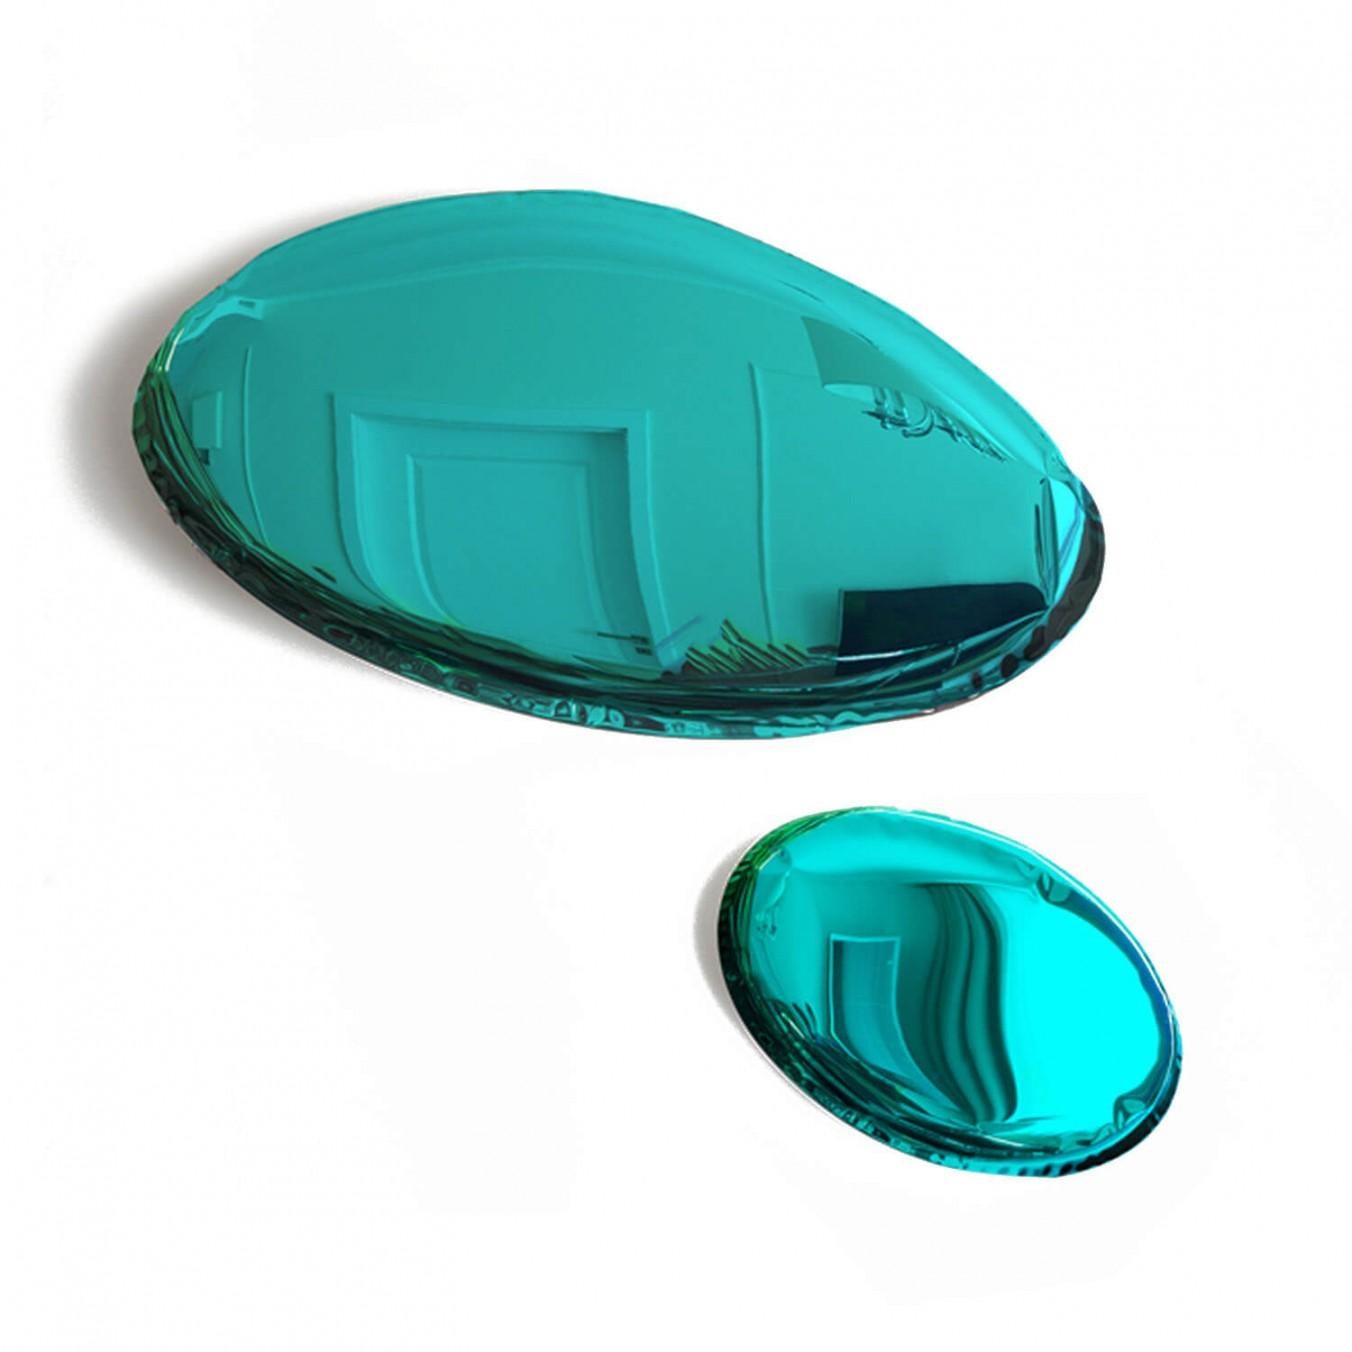 Tafla O5 wall mirror in stainless steel (Gradient Collection), Zieta
Dimensions: 
H 23.63 in. x W 15.75 in. x D 2.37 in.
H 60 cm x W 40 cm x D 6 cm
Material: stainless steel.
Finish: gradient of emerald/sapphire.

About Zieta: 

Zietas main goal is